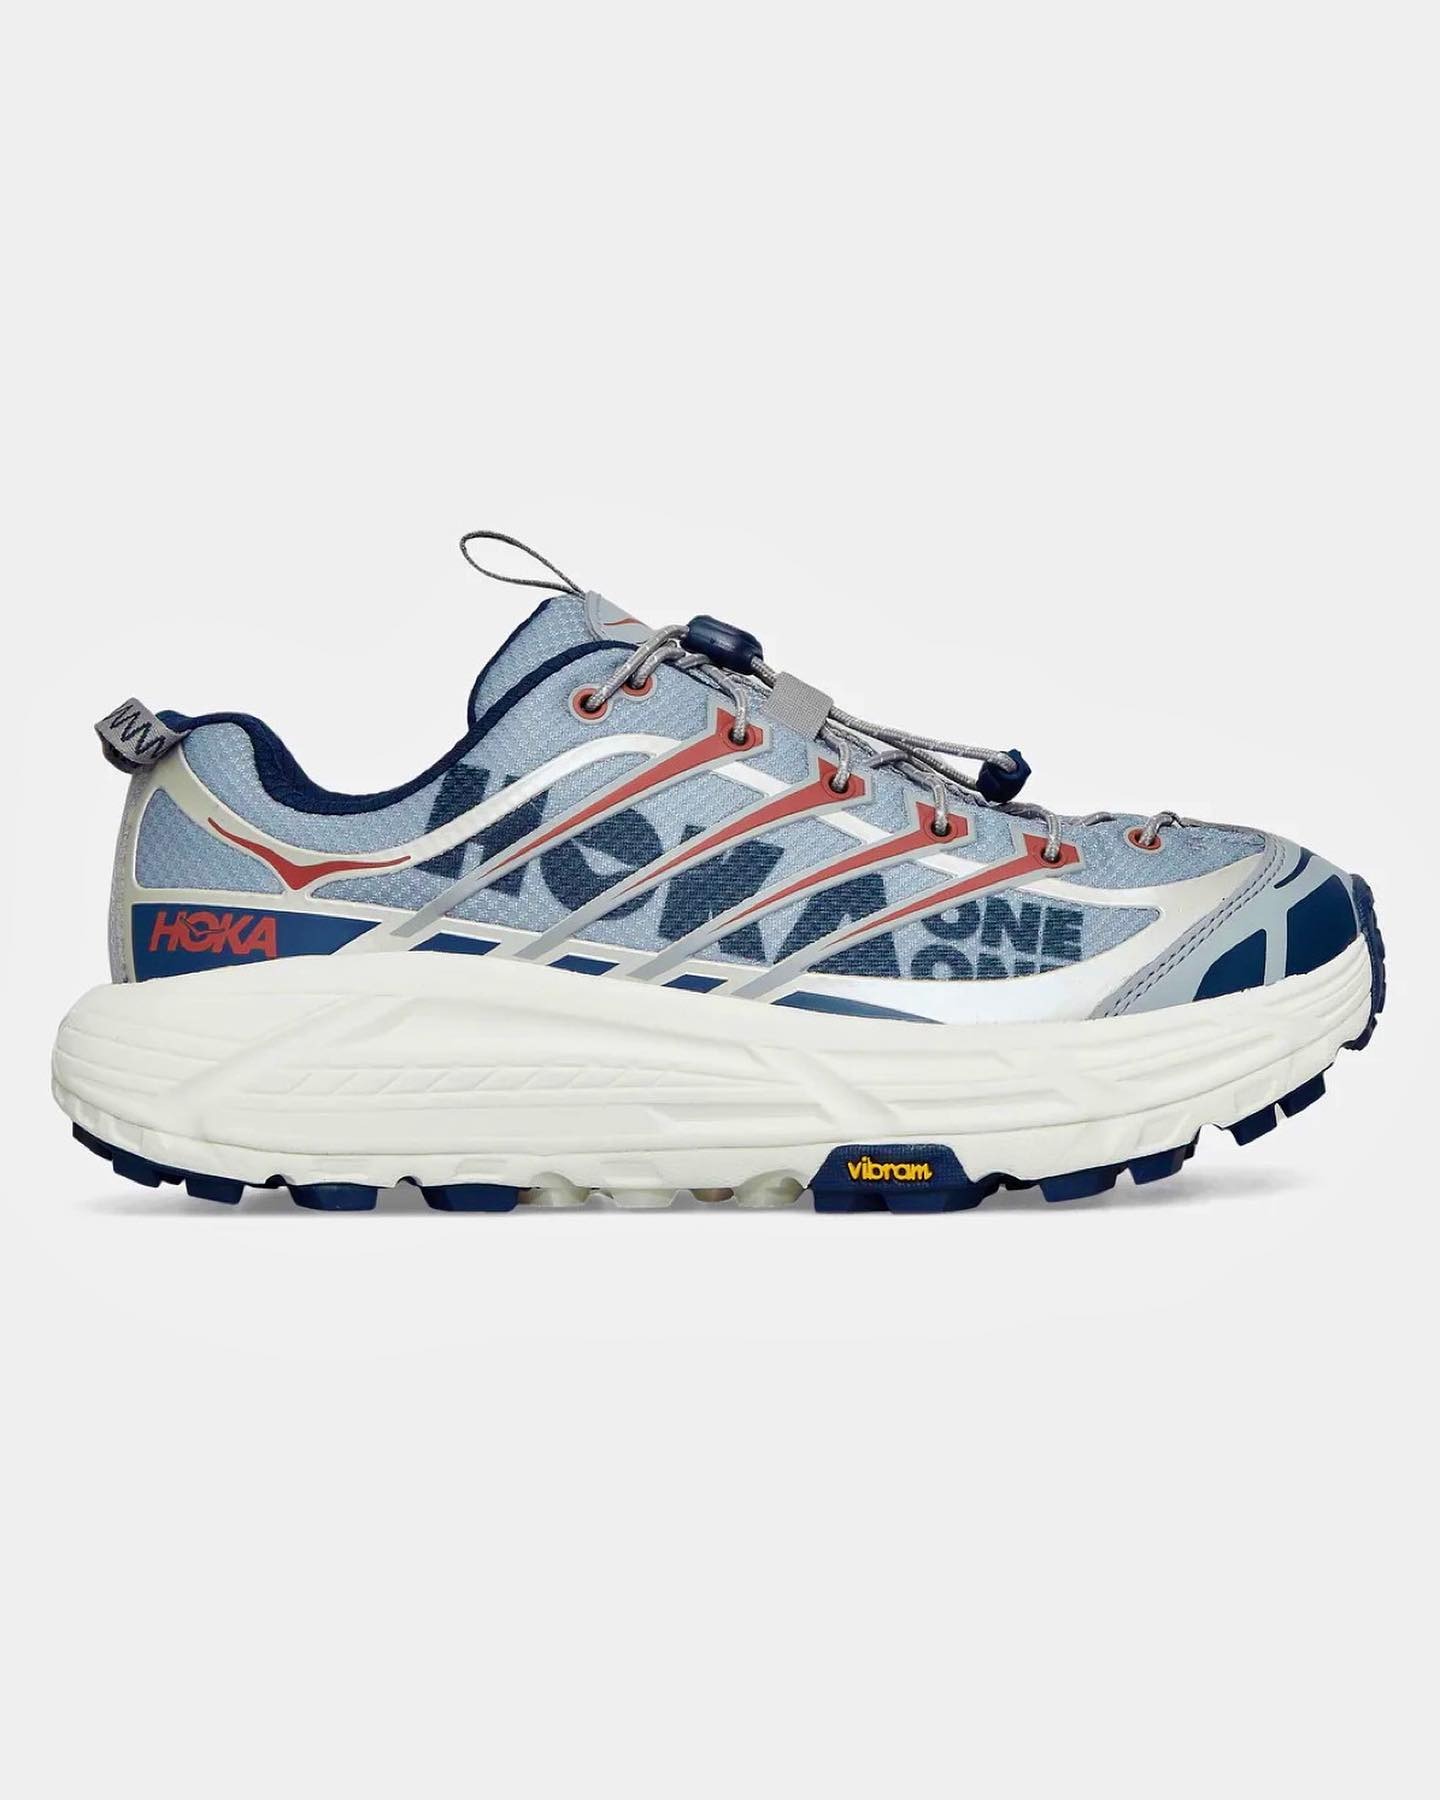 A photograph of HOKA's Mafate Three Two sneaker in a blue and white colorway with Vibram sole